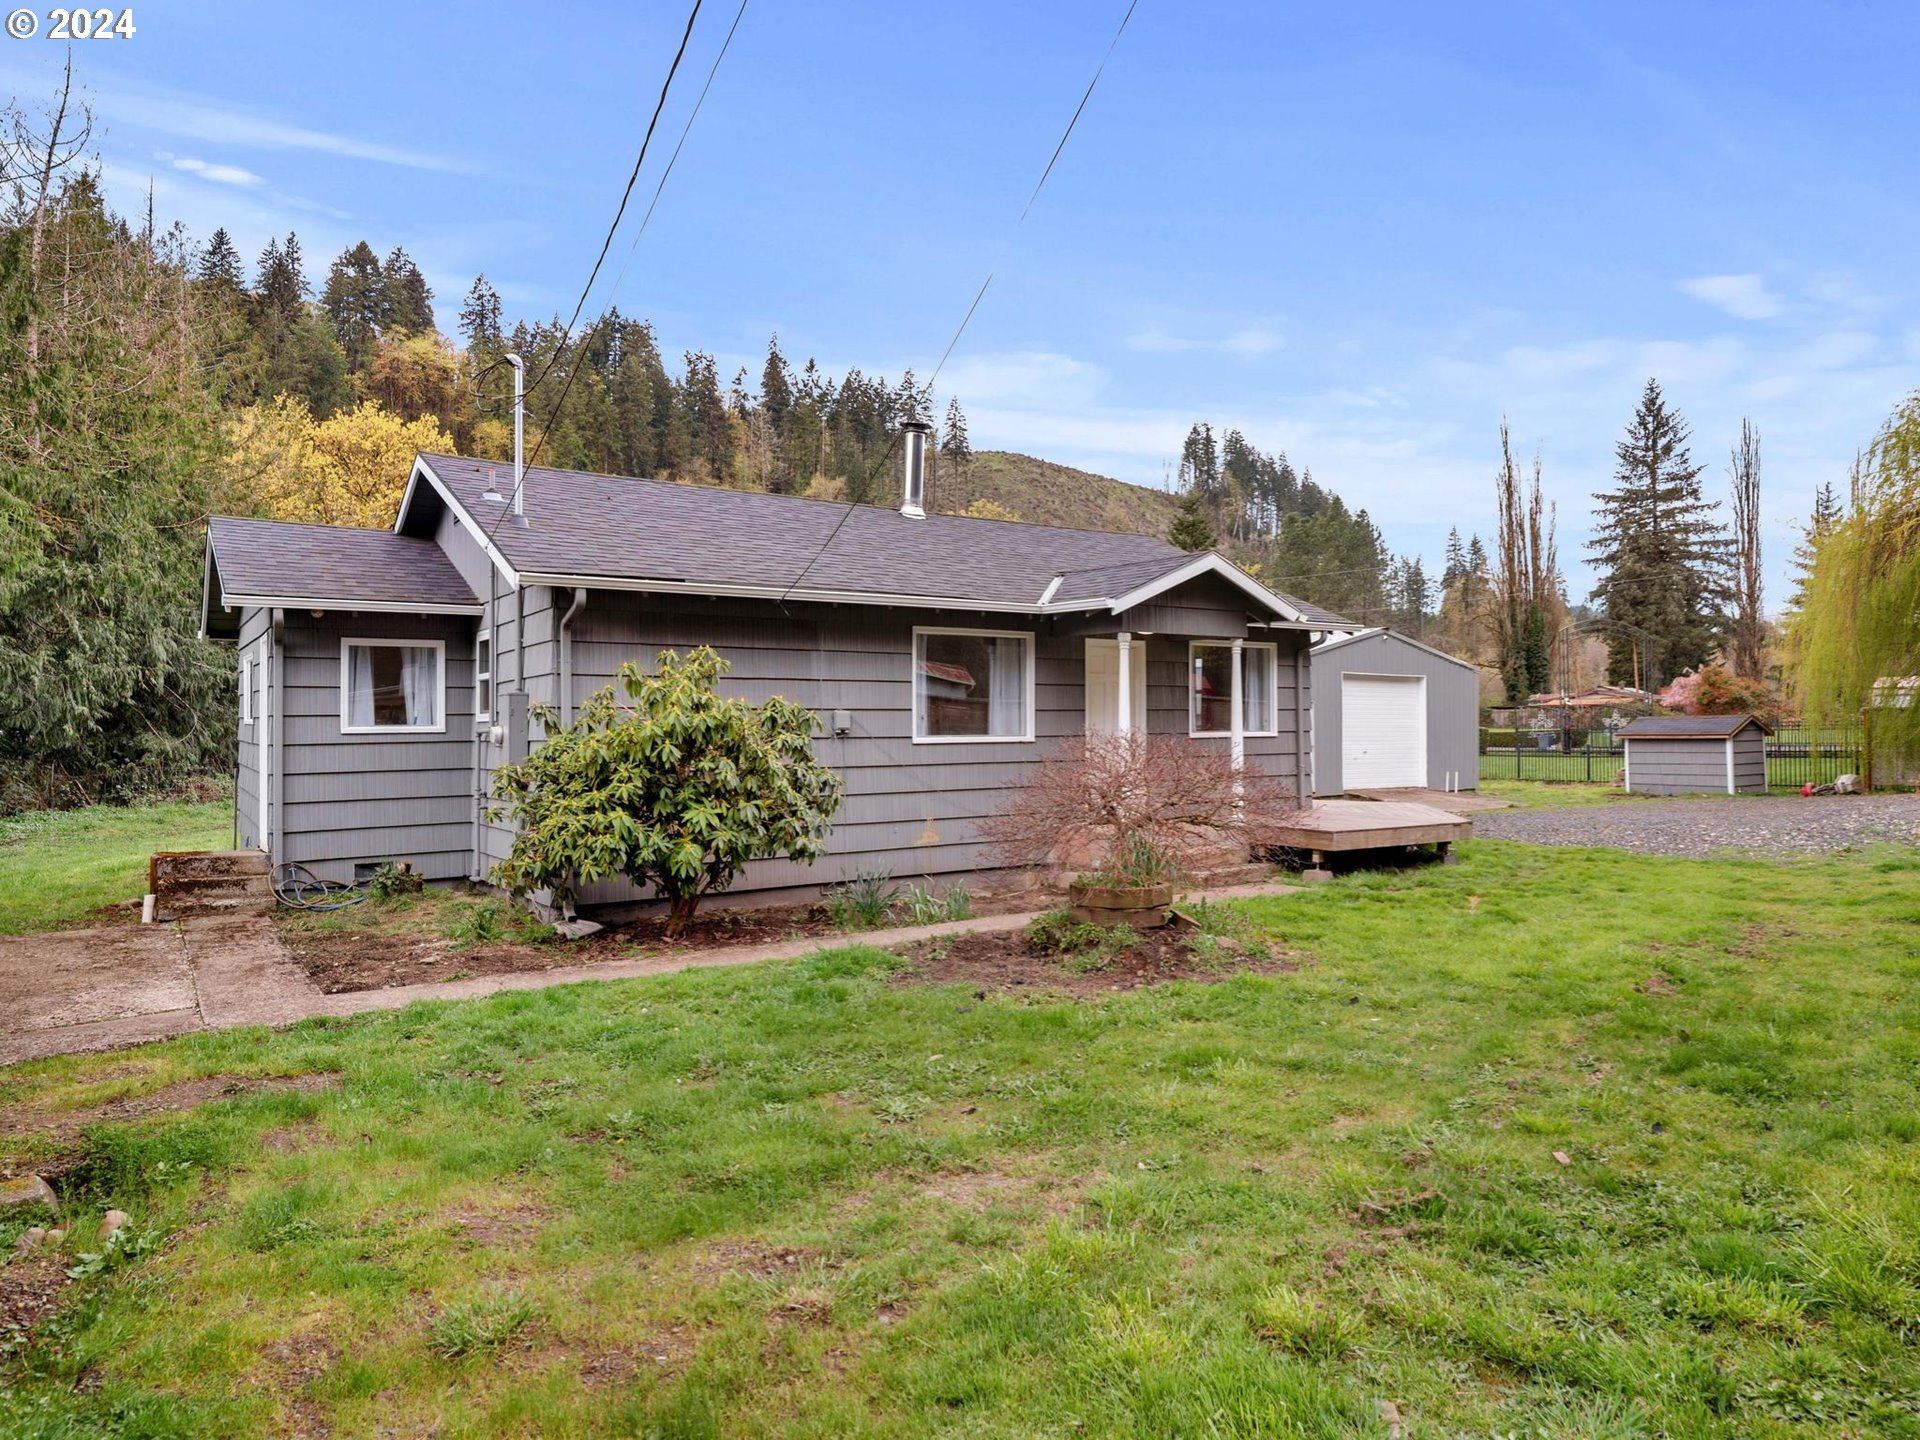 32262 SCAPPOOSE VERNONIA HWY, Scappoose, OR 97056